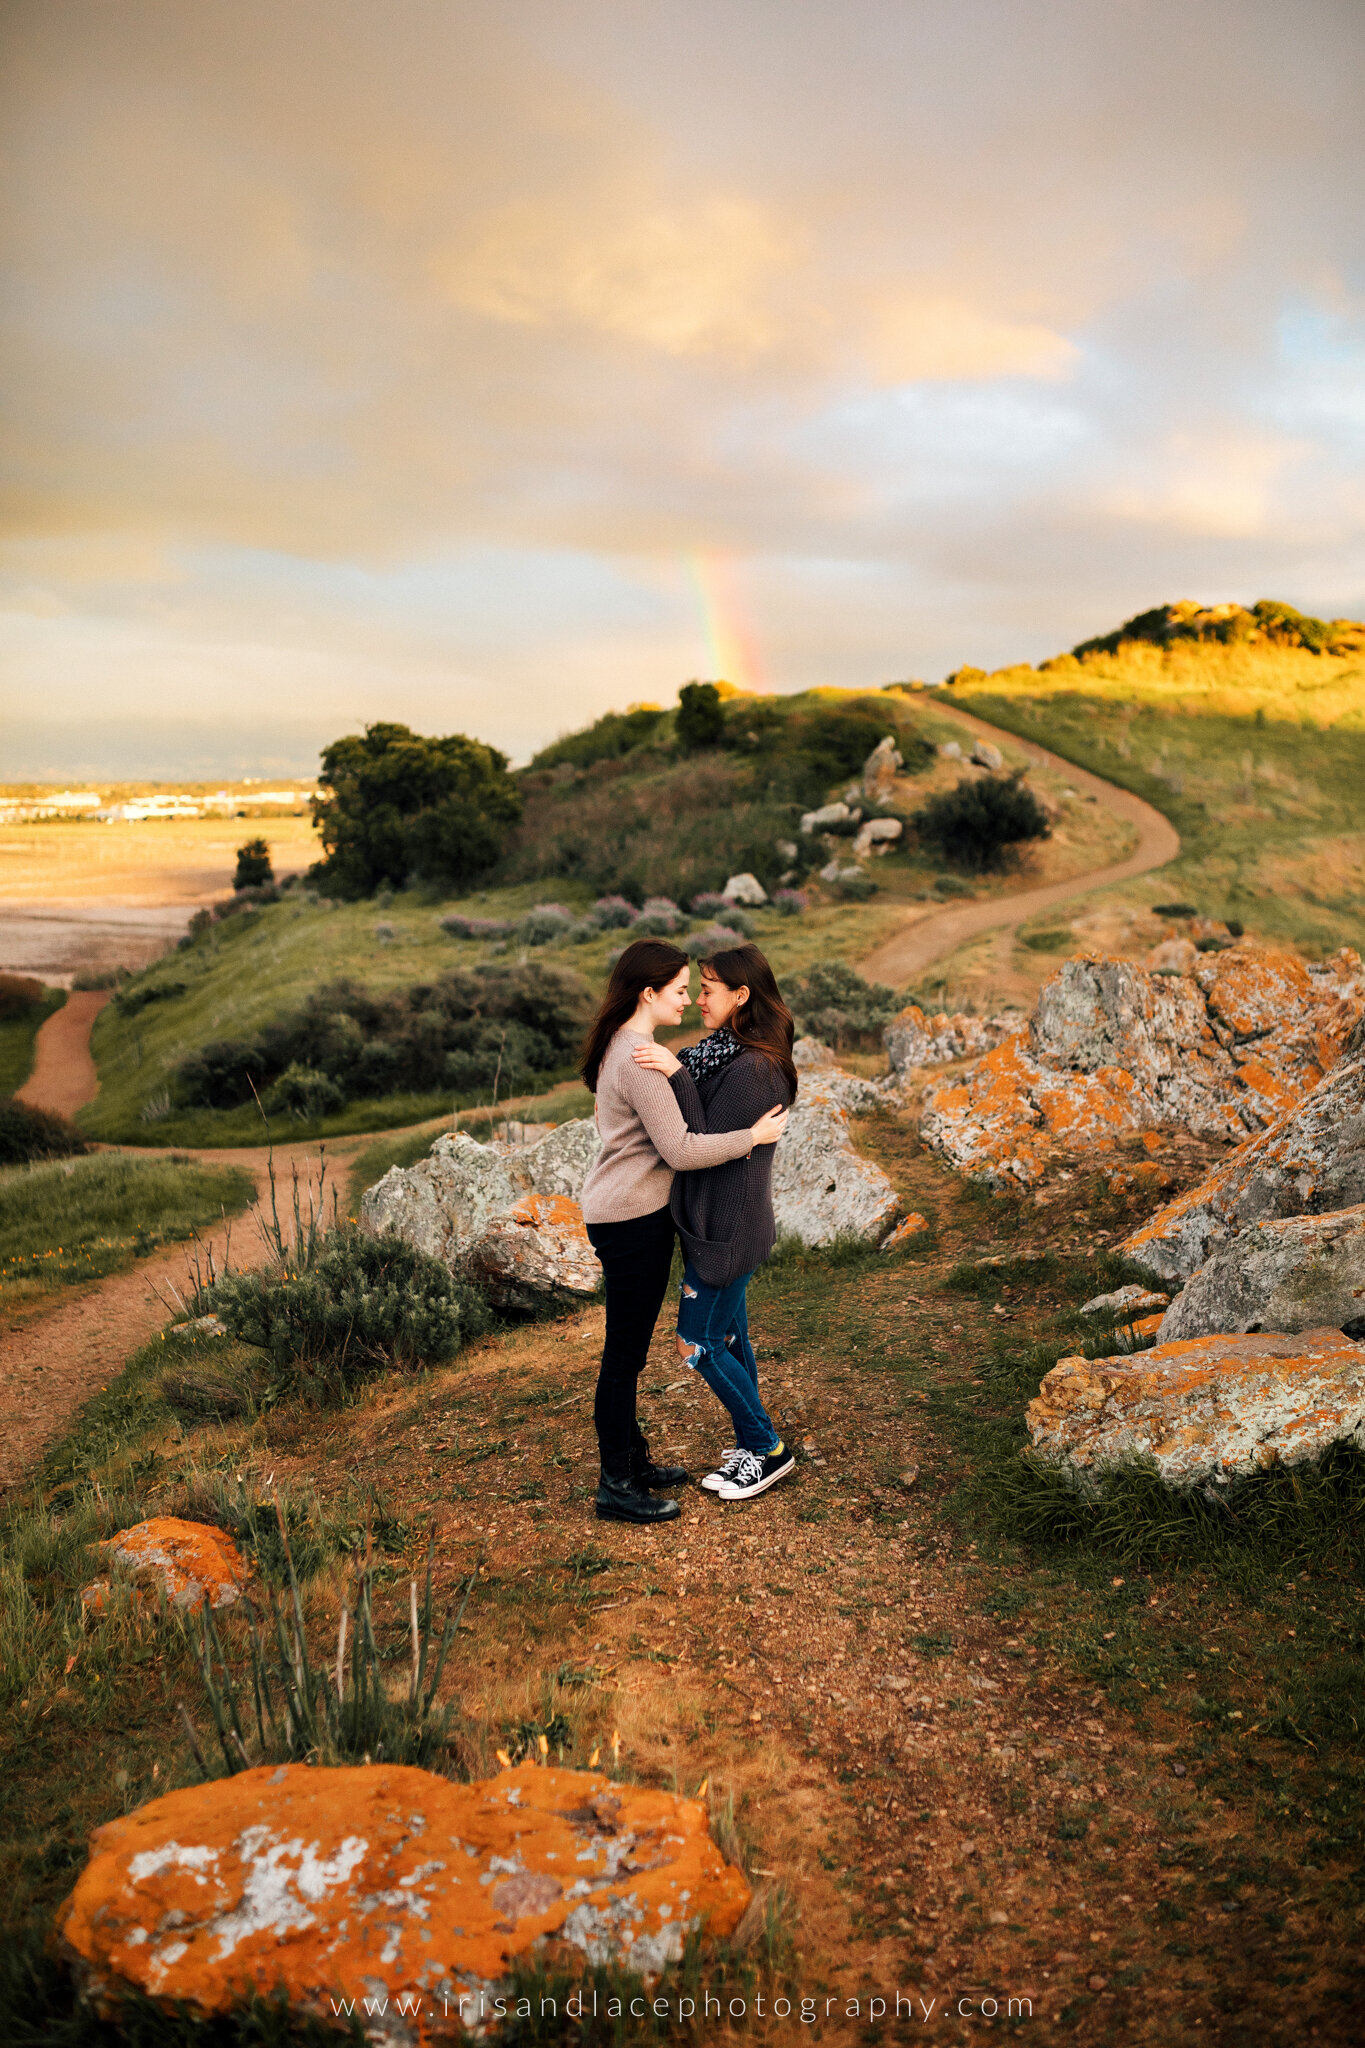 Lifestyle Photography in East Bay, SF Bay Area  |  Coyote Hills Park  |  Iris and Lace Photography 